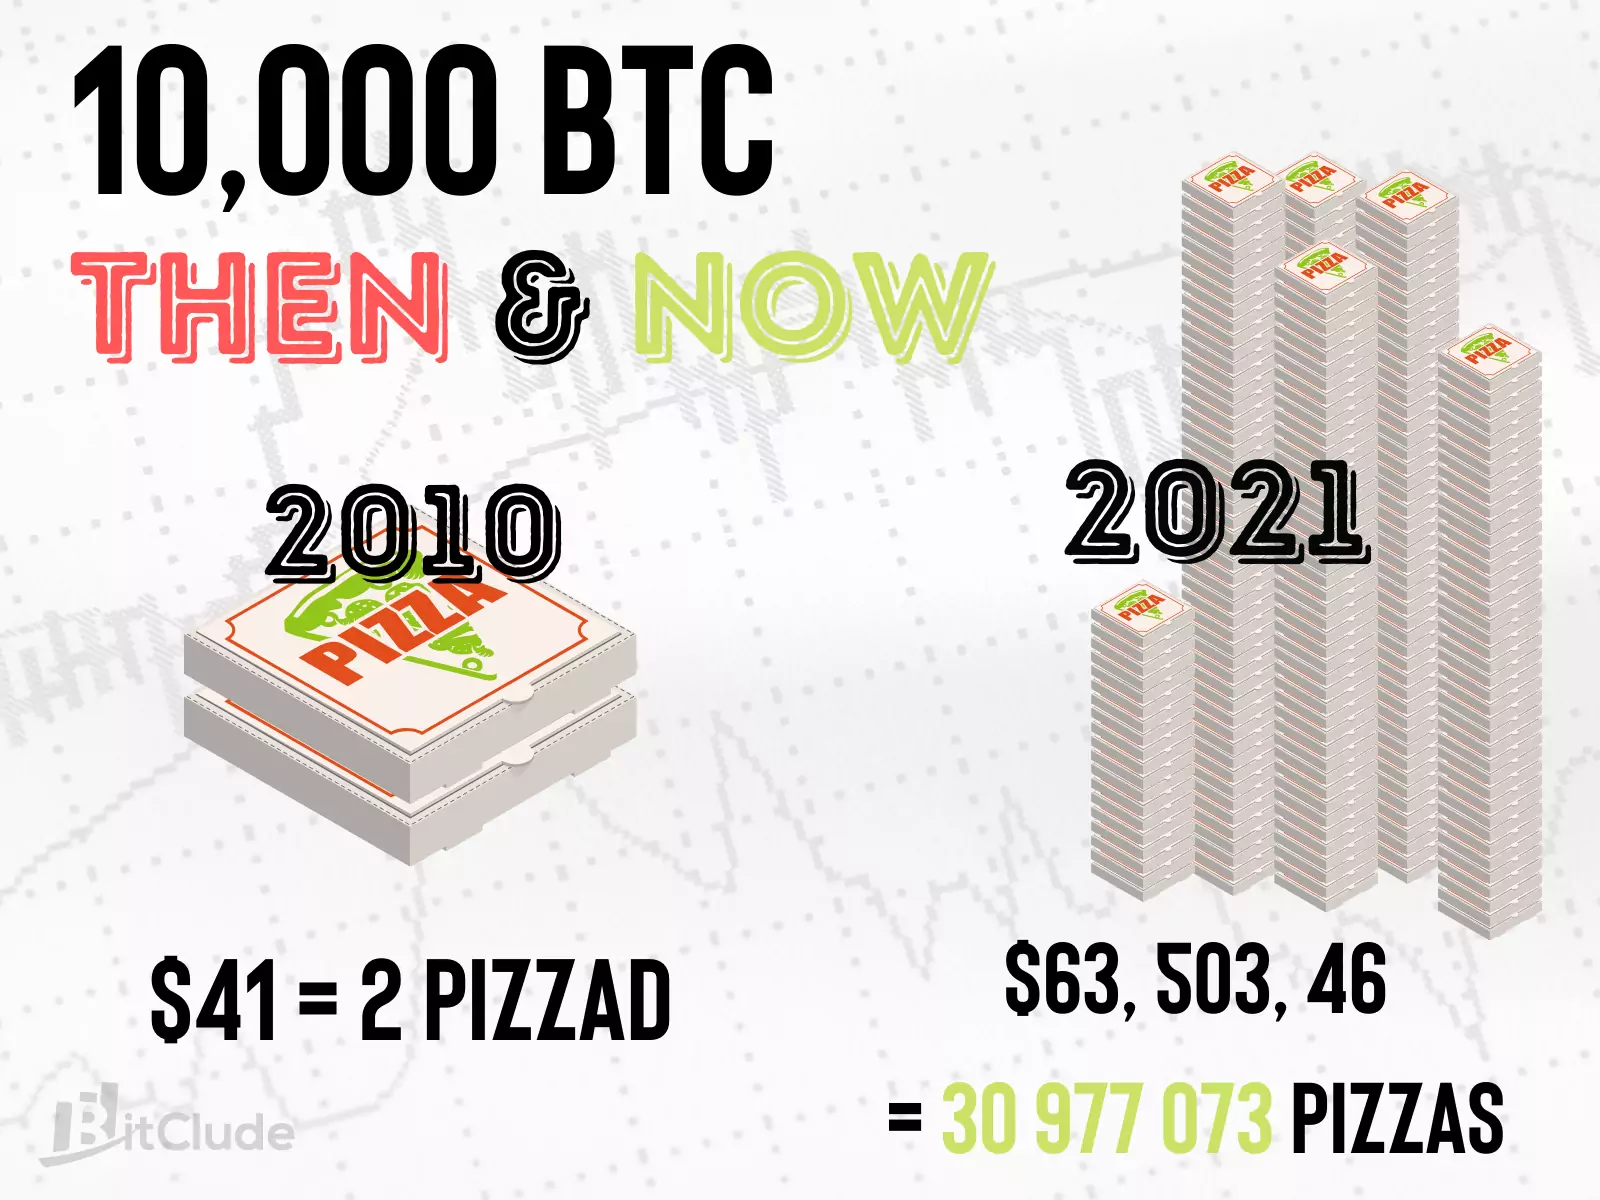 Bitcoin's value once and today.